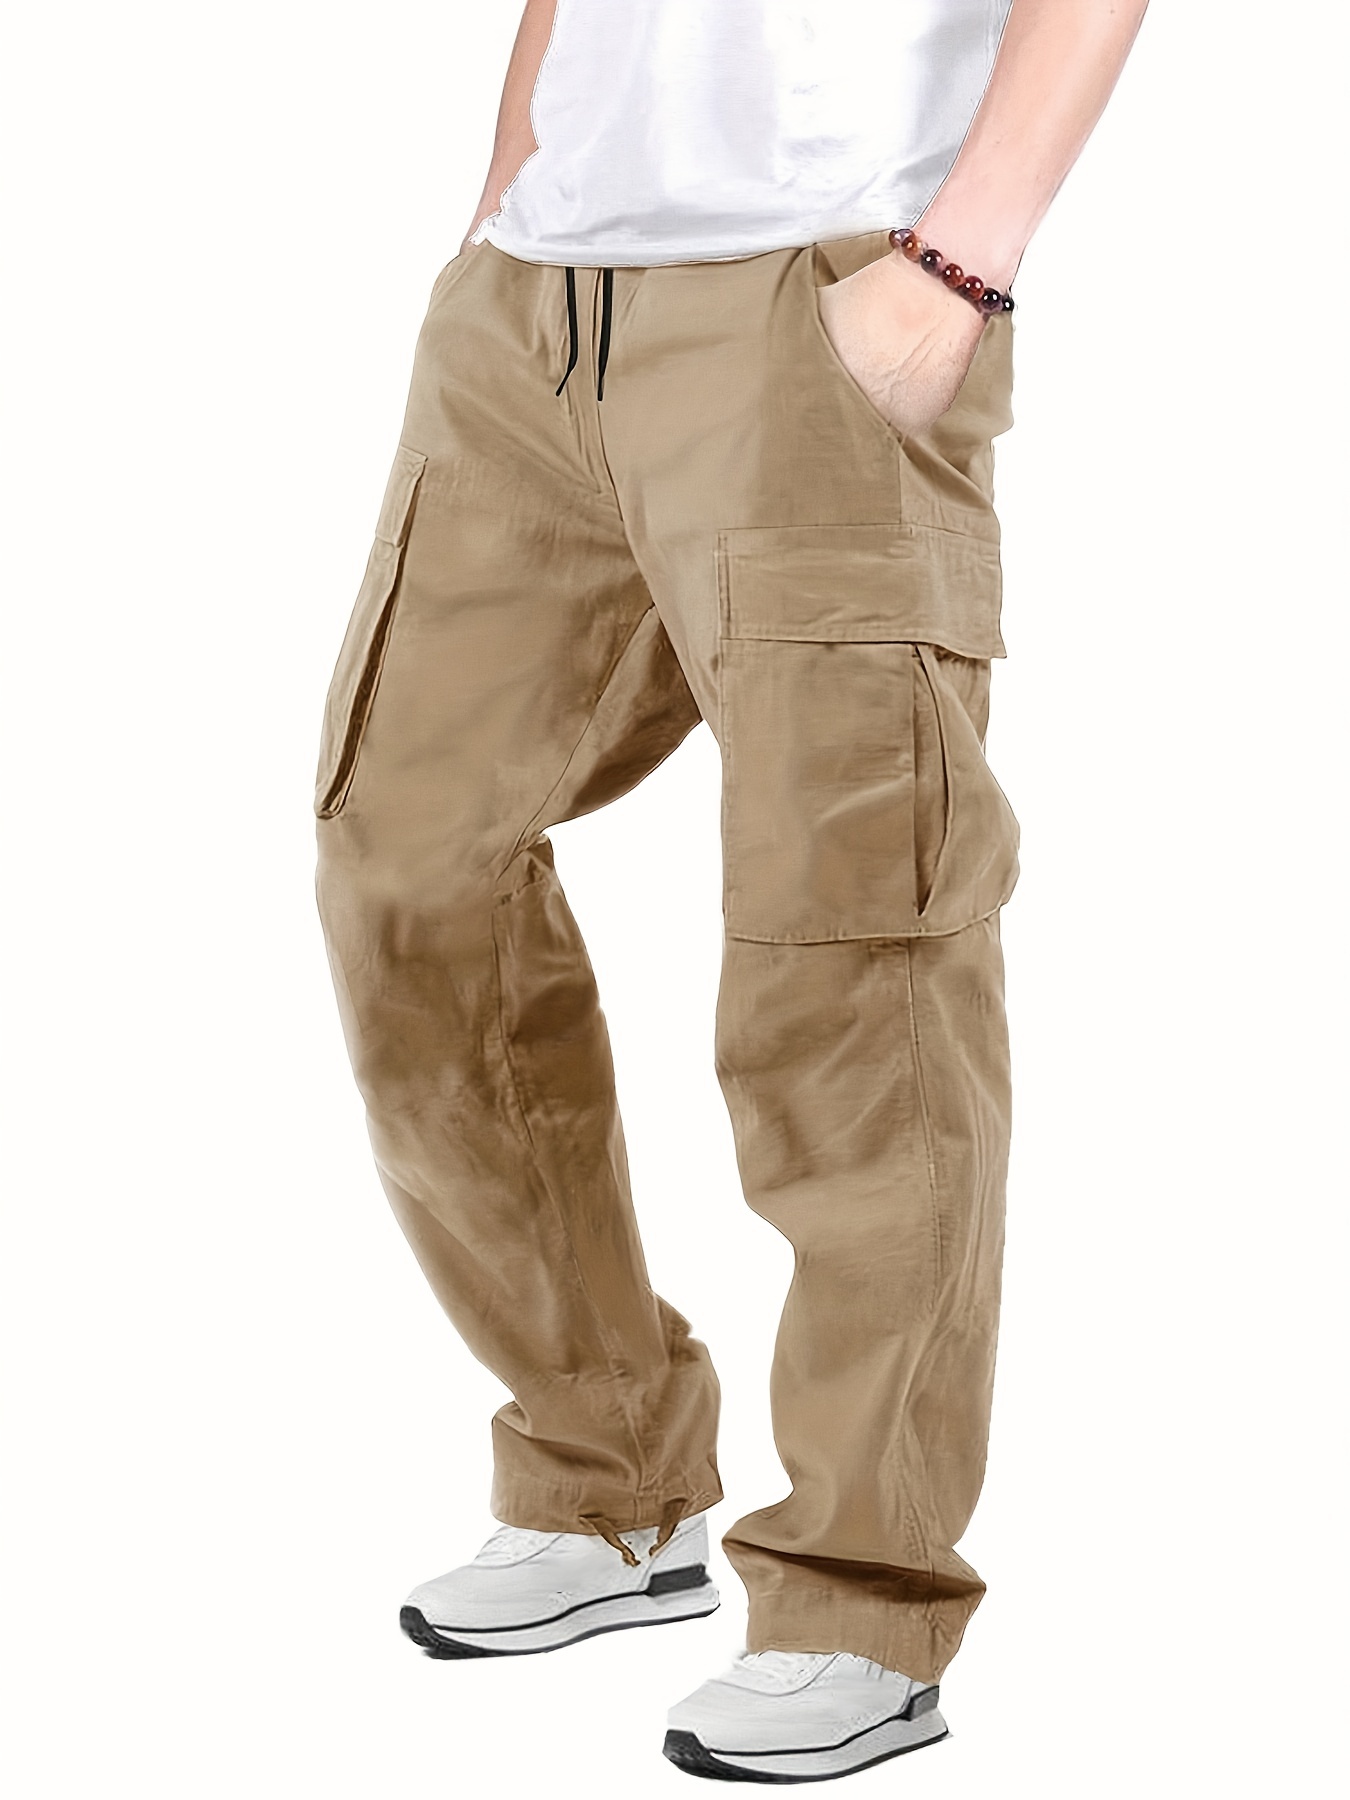 Cargo Pants for Men Solid Casual Pants Multiple Pockets Straight